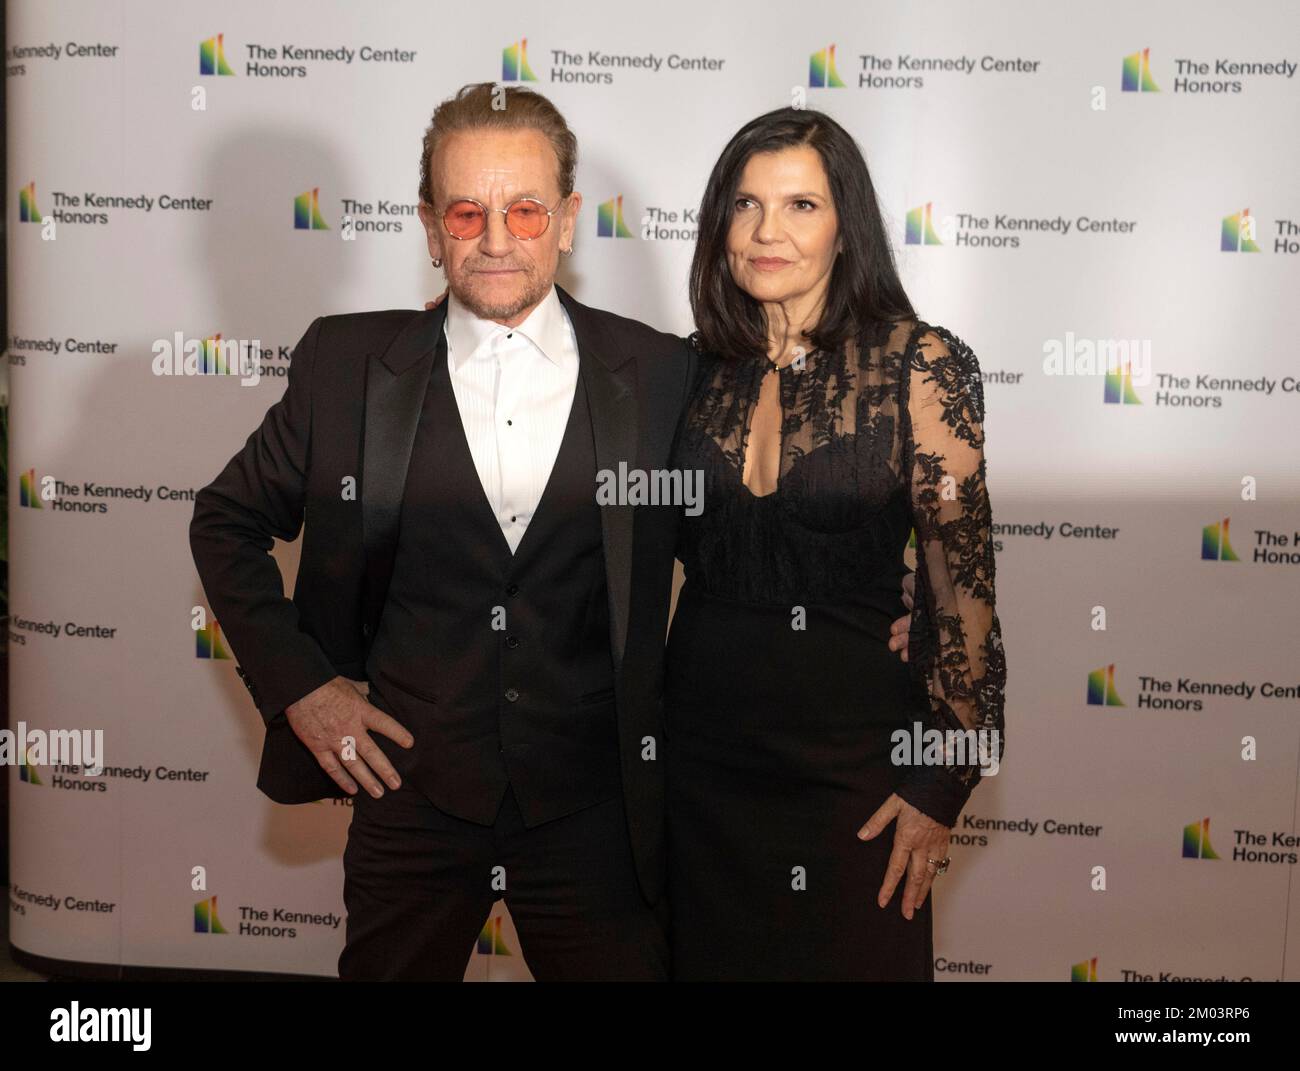 Bono and his wife, Ali Hewson, arrive for the formal Artist's Dinner honoring the recipients of the 45th Annual Kennedy Center Honors at the Department of State in Washington, DC on Saturday, December 3, 2022. The 2022 honorees are: actor and filmmaker George Clooney; contemporary Christian and pop singer-songwriter Amy Grant; legendary singer of soul, Gospel, R&B, and pop Gladys Knight; Cuban-born American composer, conductor, and educator Tania León; and iconic Irish rock band U2, comprised of band members Bono, The Edge, Adam Clayton, and Larry Mullen Jr. Credit: Ron Sachs/Pool via CNP Stock Photo